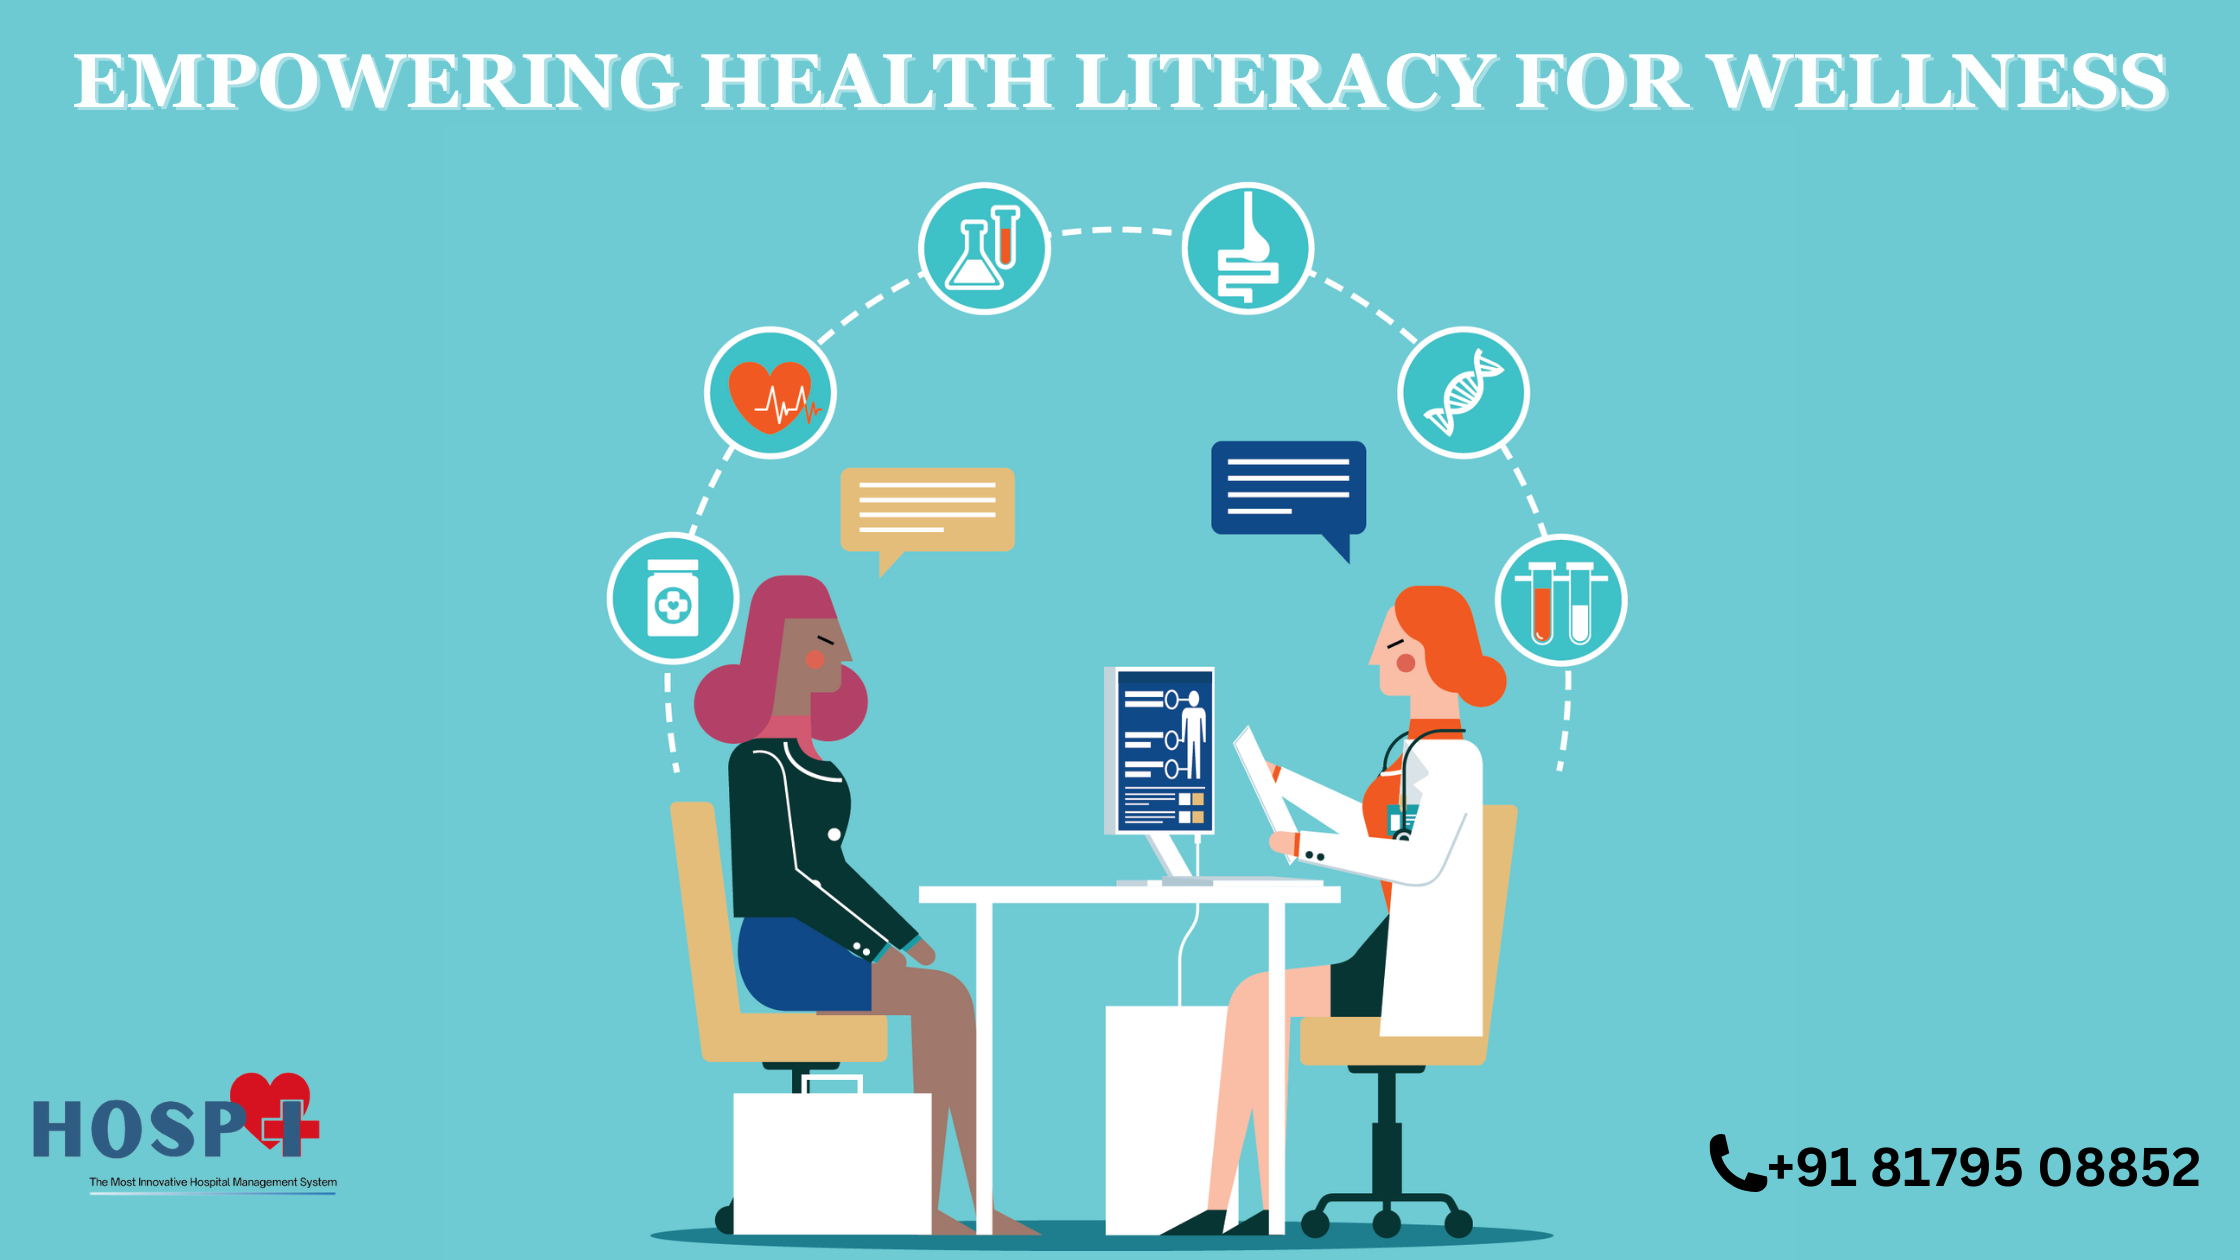 Empowering Health Literacy for Wellness